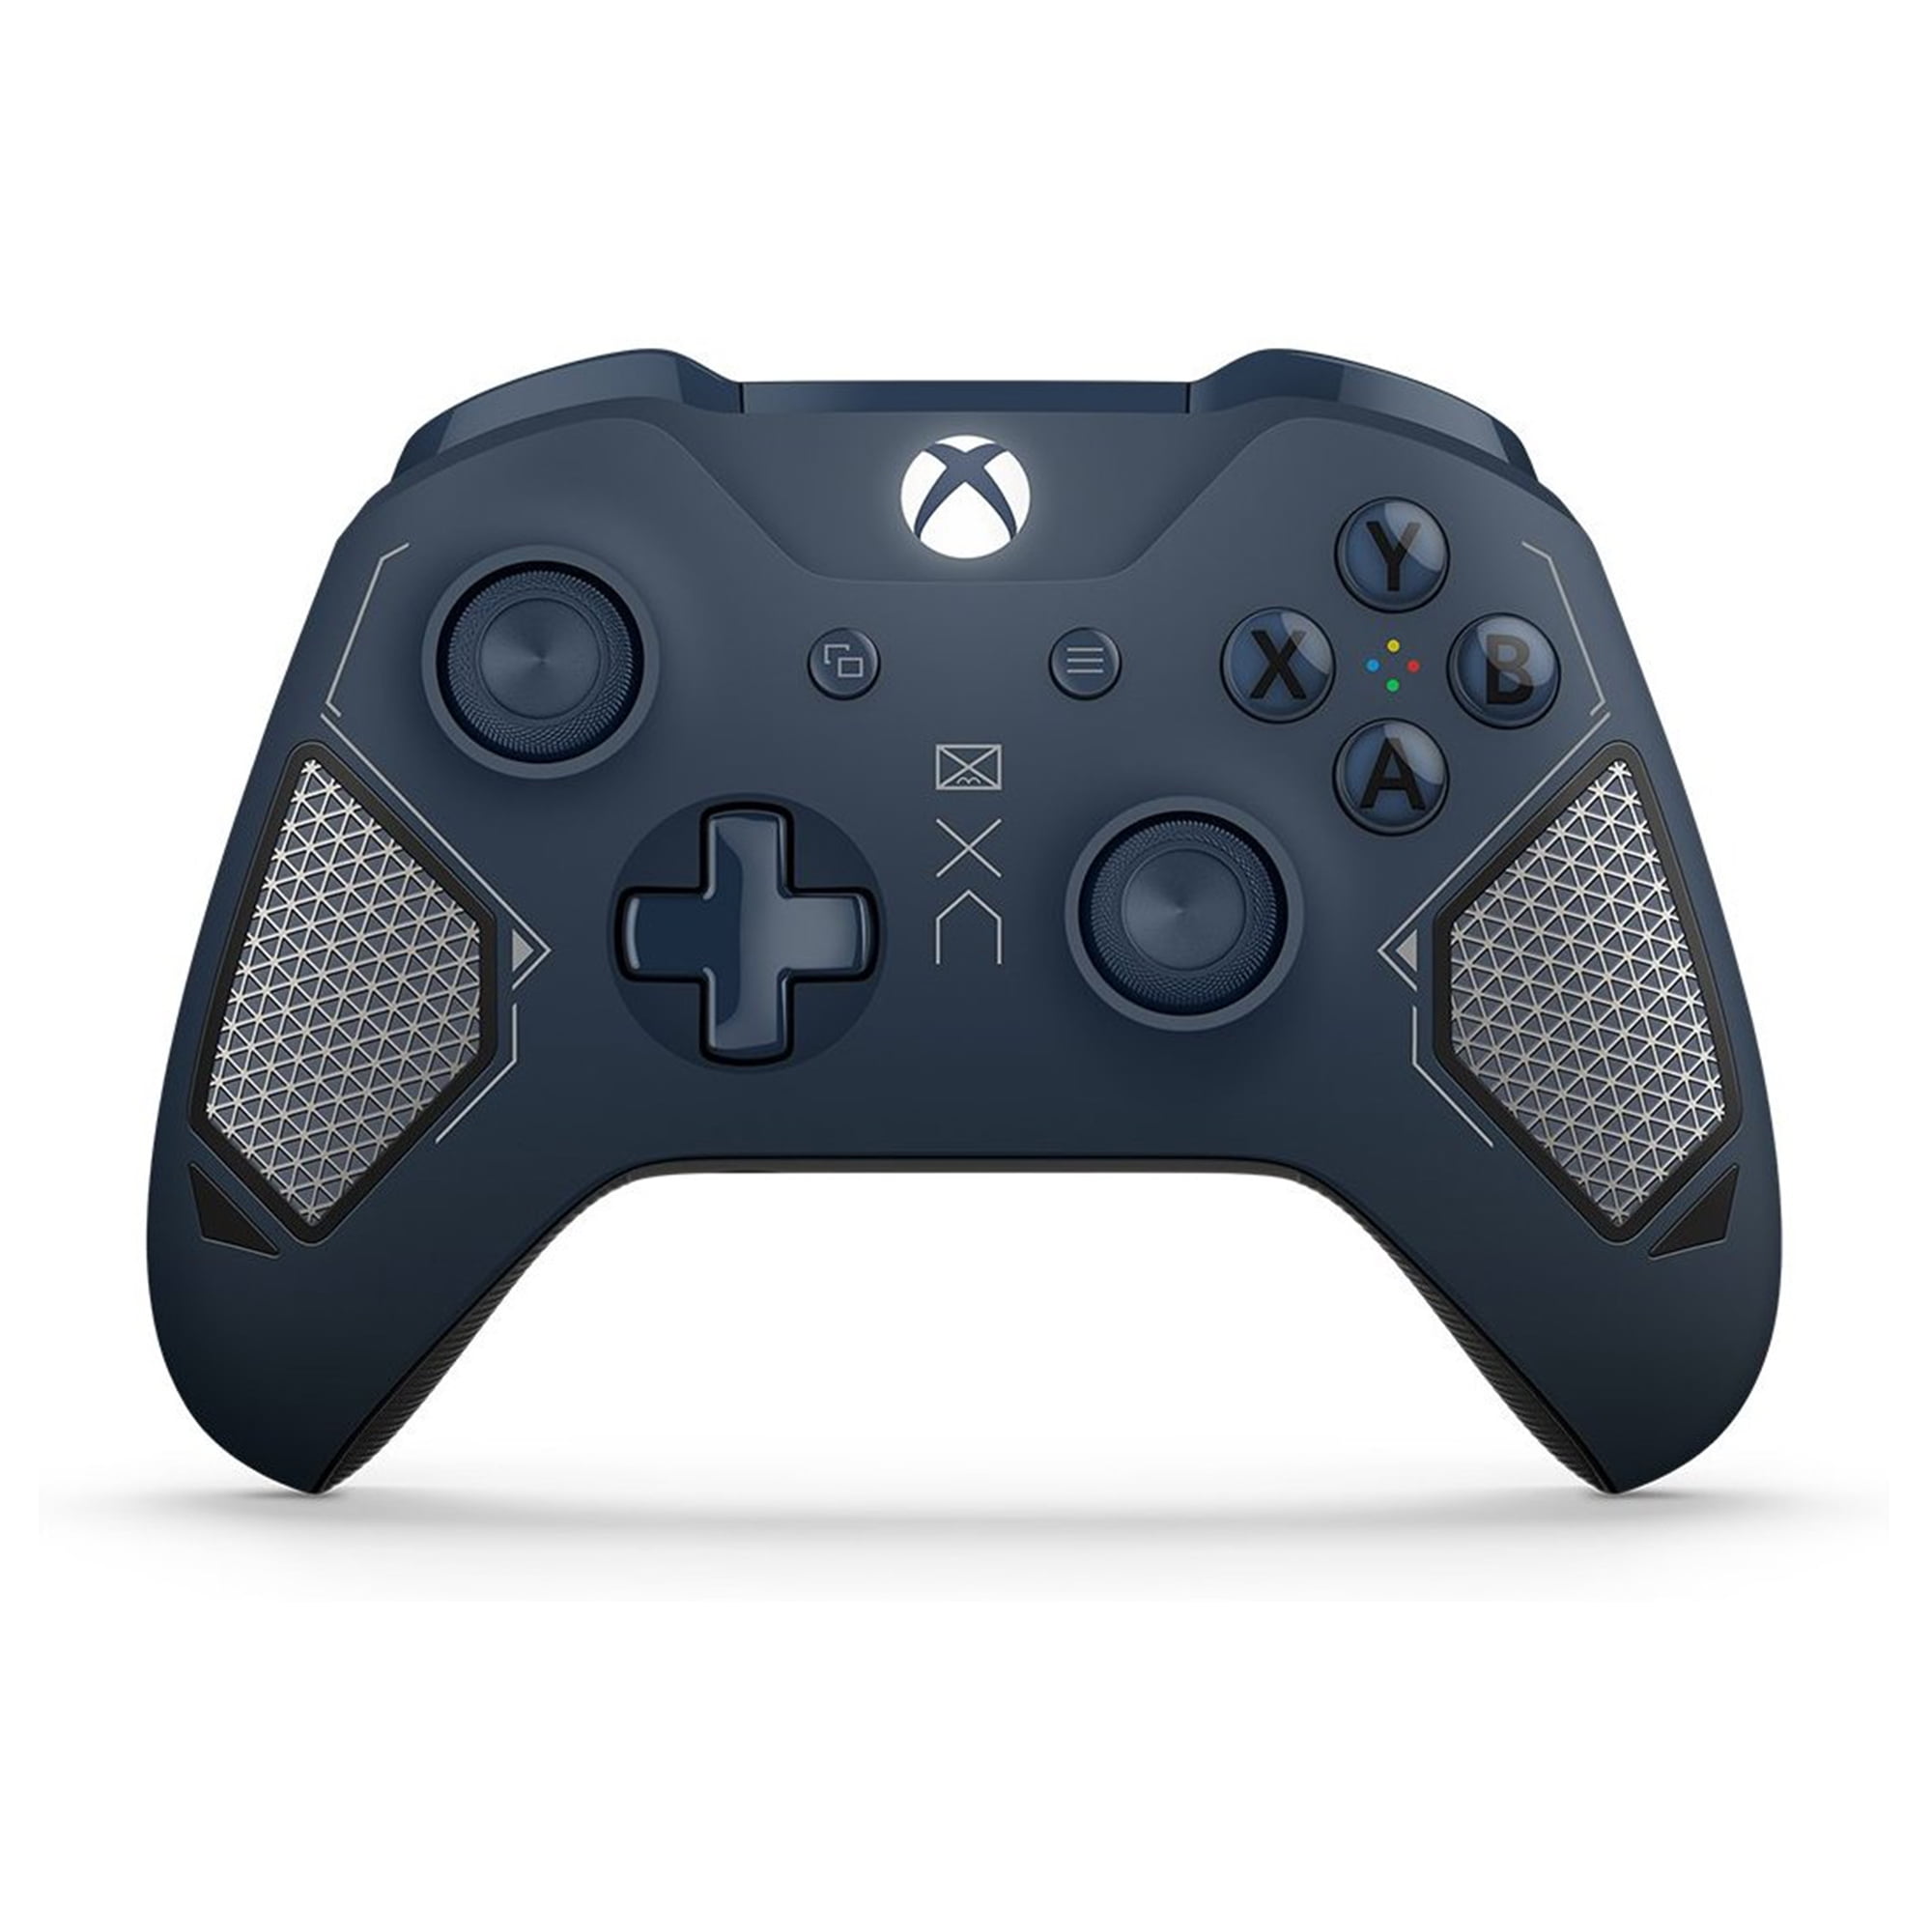 Three New Xbox One Controller Designs Revealed - Ign A98